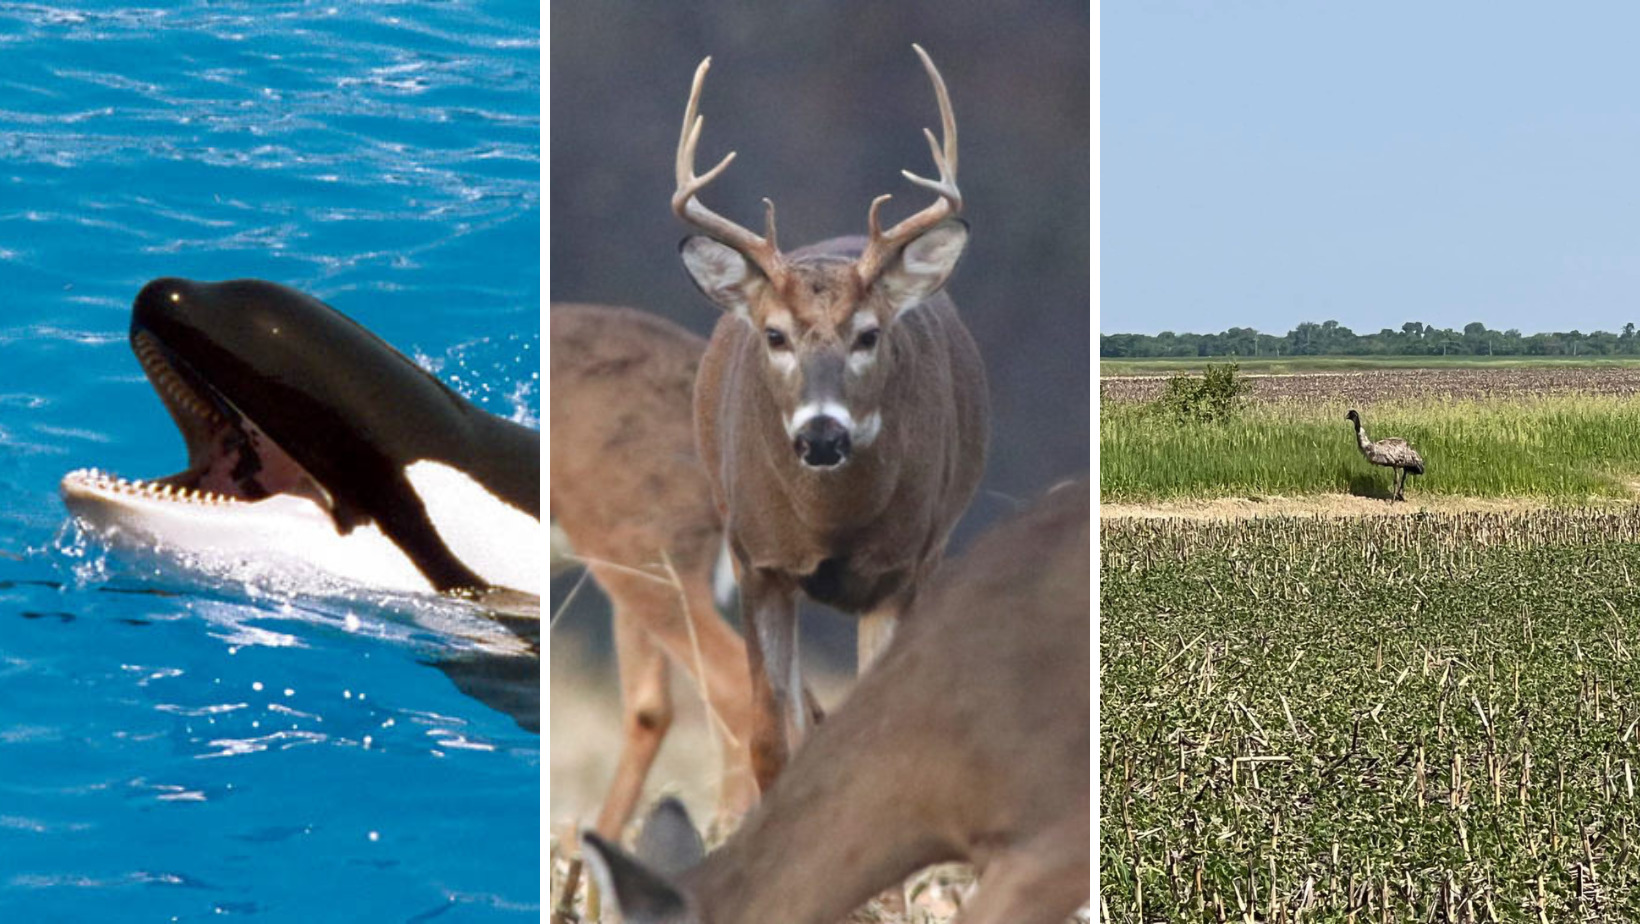 Three side by side images: a black and white orca coming out the water, an antlered deer starting straight at the camera, and an emu in the distance, alongside a cornfield.